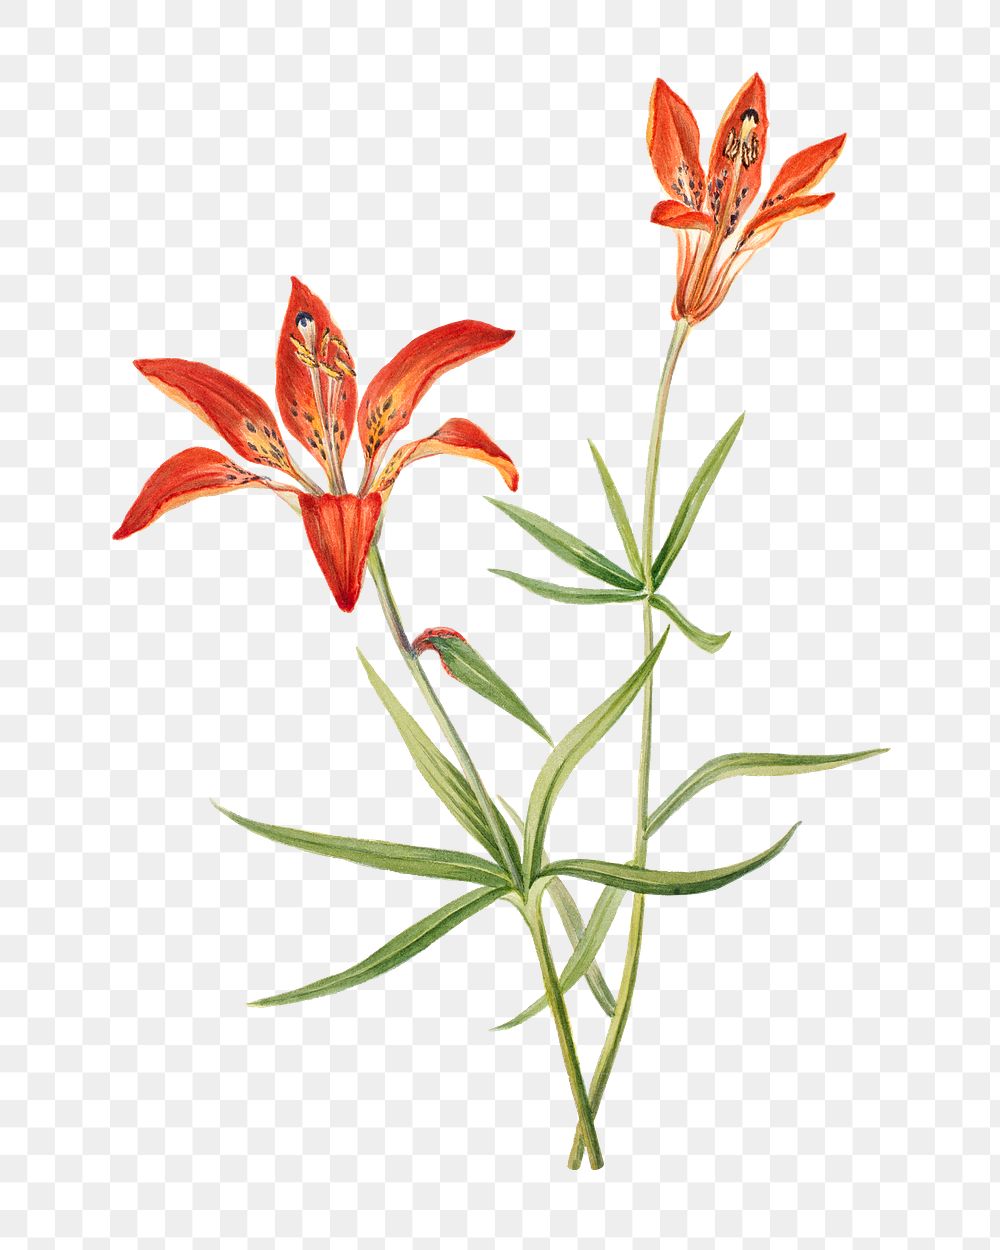 Red lily blossom png, transparent background